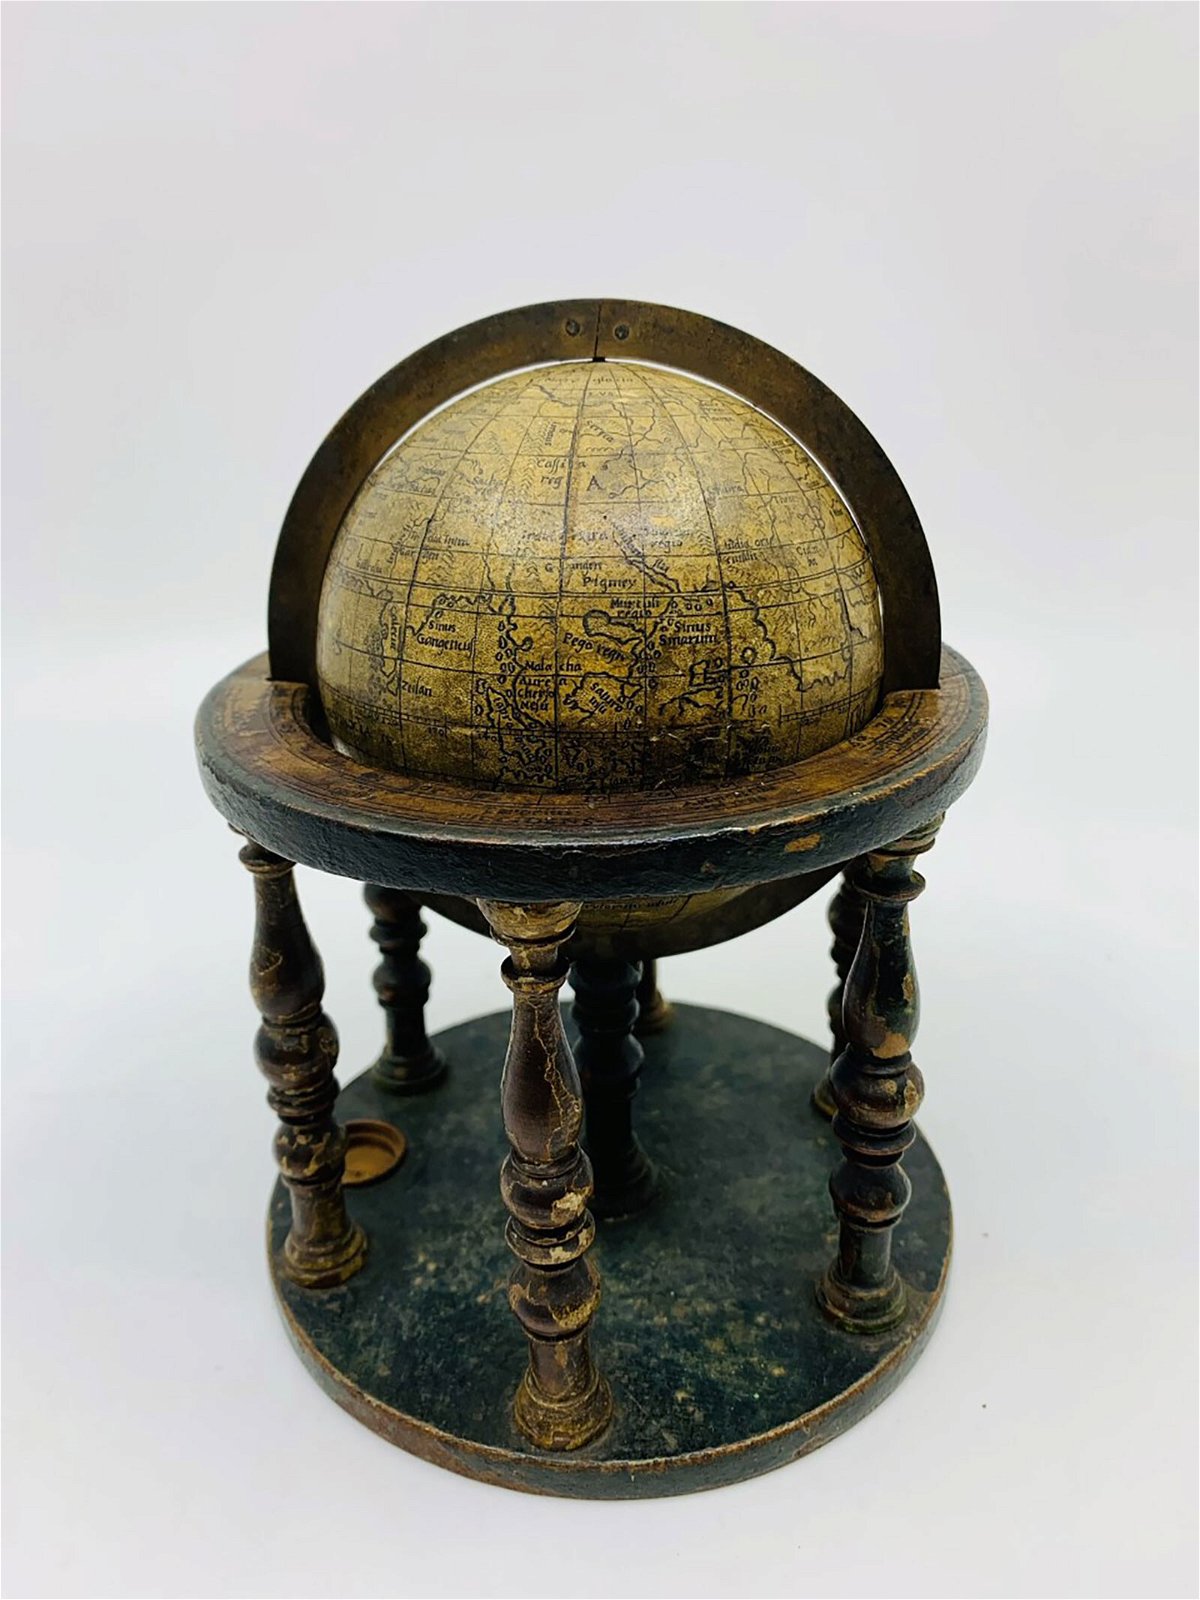 <i>courtesy Hansons Auctioneers & Valuers Ltd</i><br/>The sixteenth century globe could be the oldest one to ever come to auction.